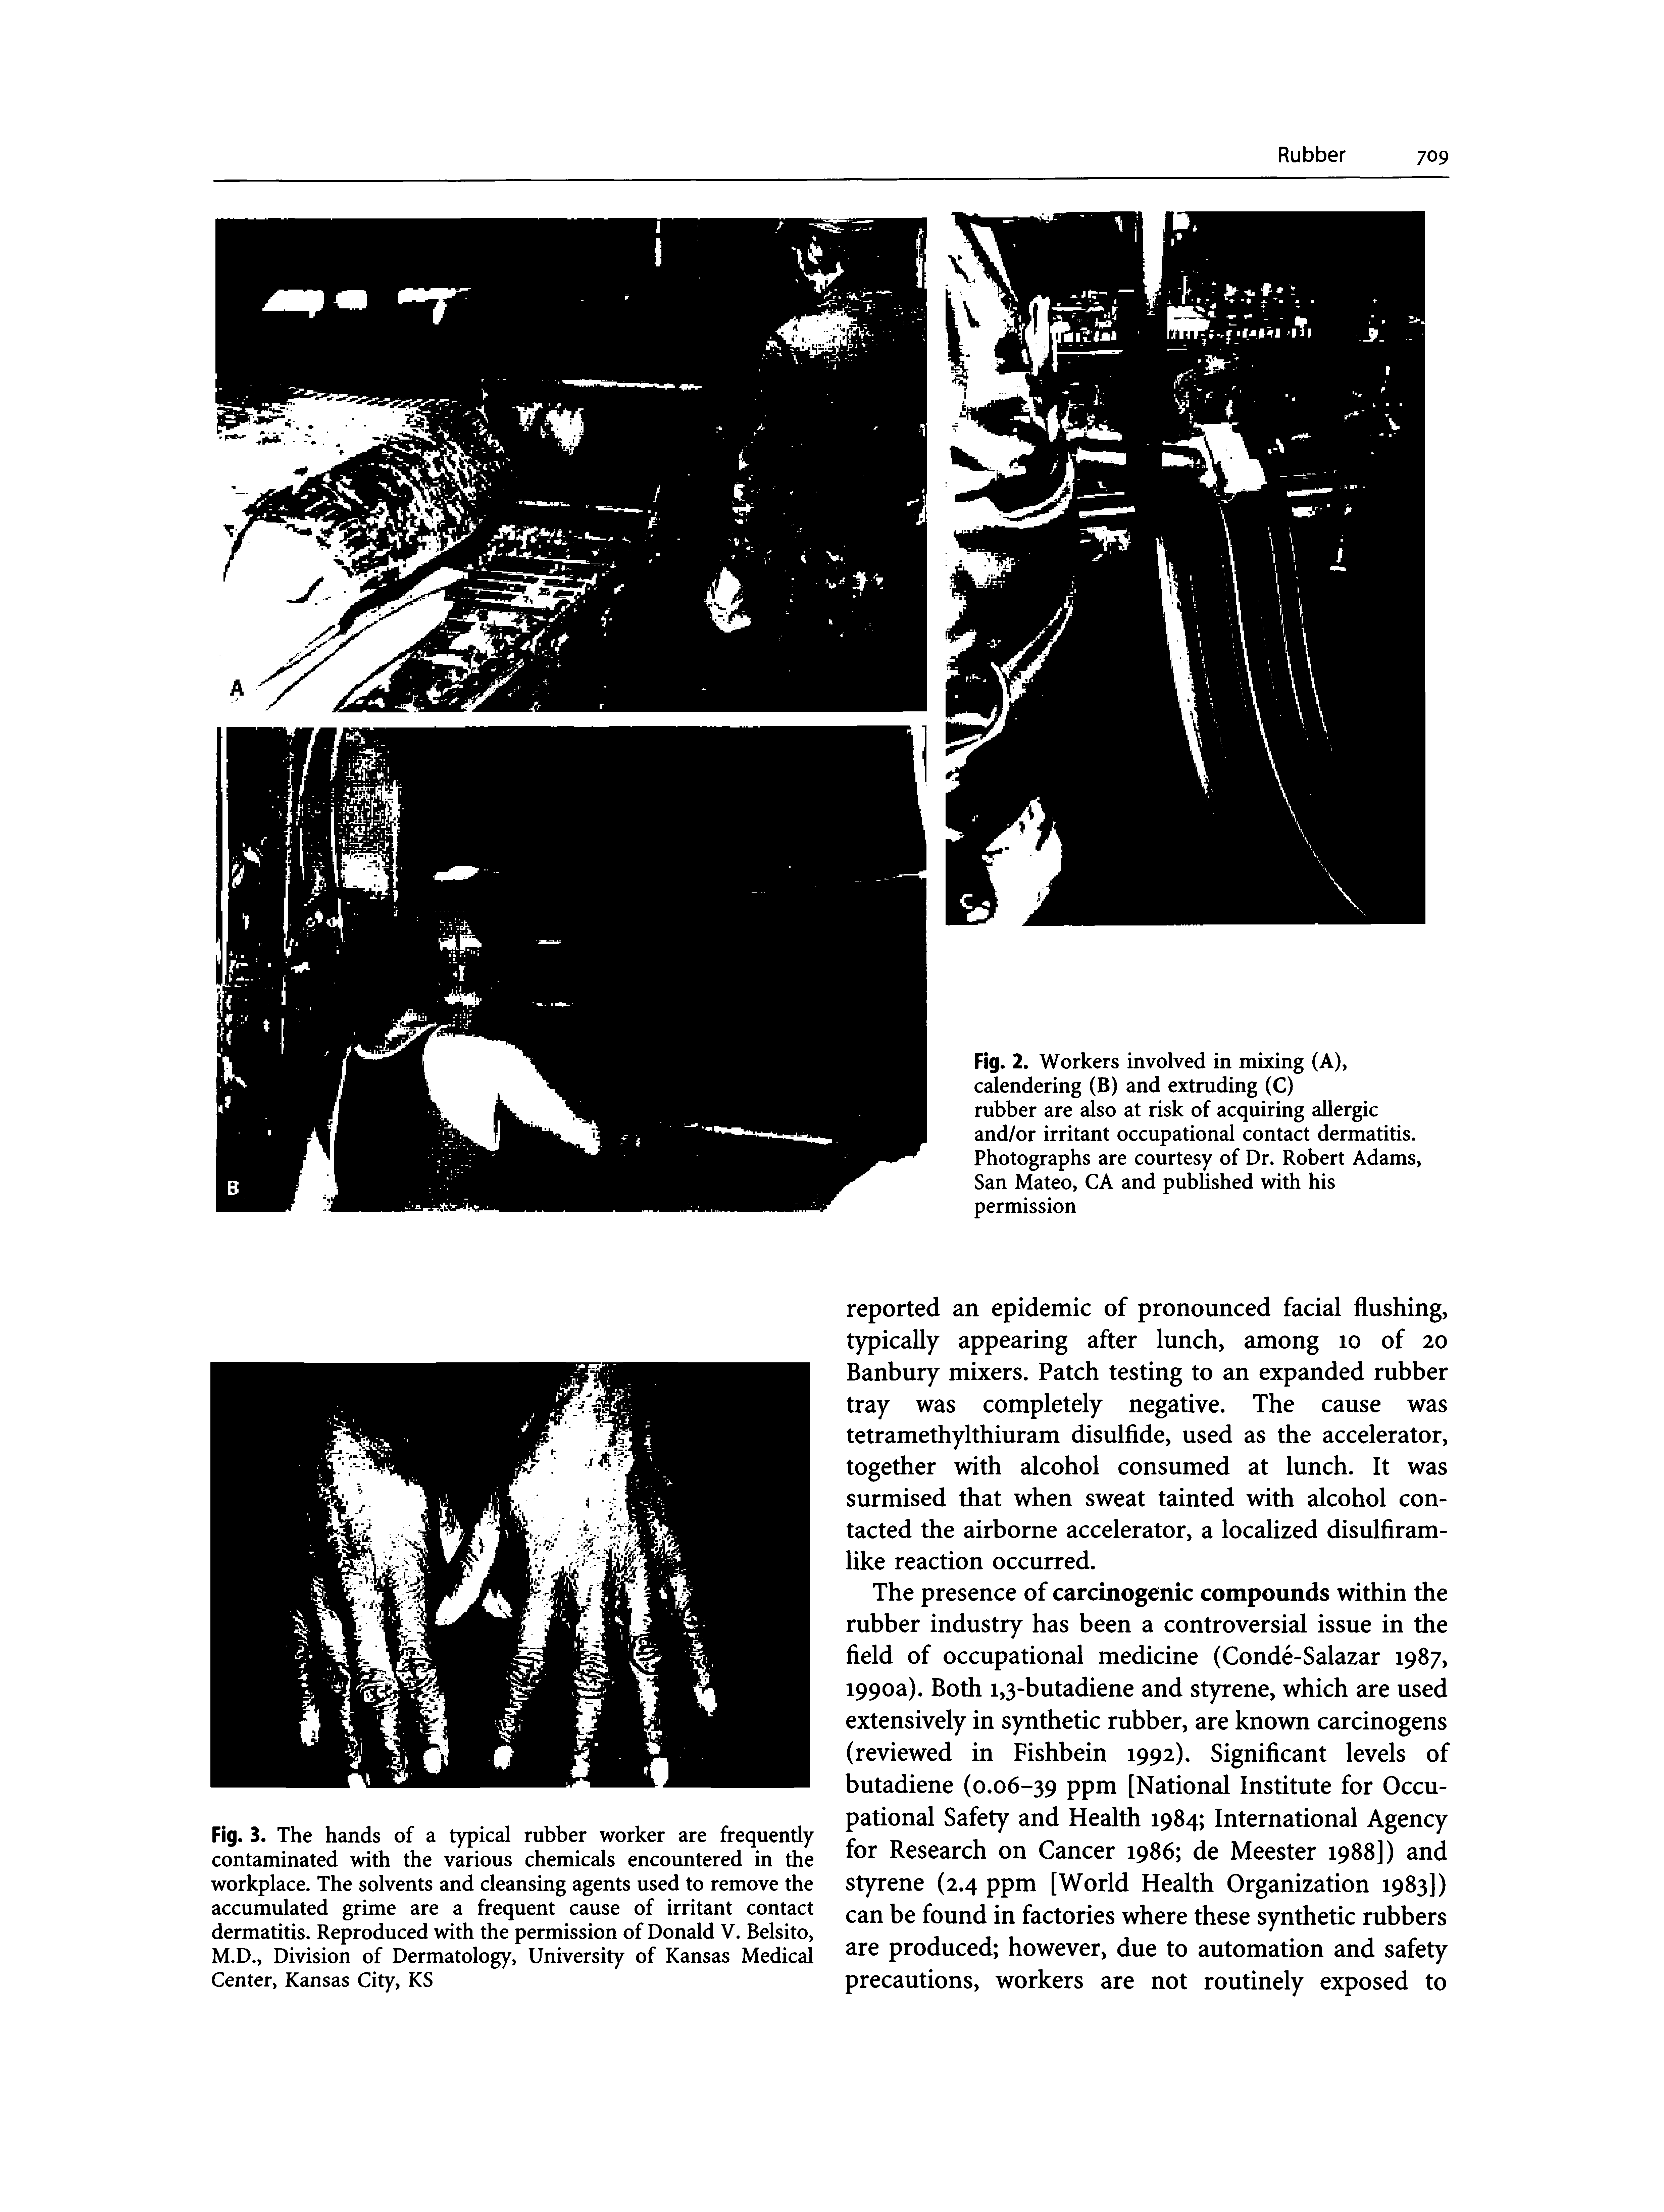 Fig. 3. The hands of a typical rubber worker are frequently contaminated with the various chemicals encountered in the workplace. The solvents and cleansing agents used to remove the accumulated grime are a frequent cause of irritant contact dermatitis. Reproduced with the permission of Donald V. Belsito, M.D., Division of Dermatology, University of Kansas Medical Center, Kansas City, KS...